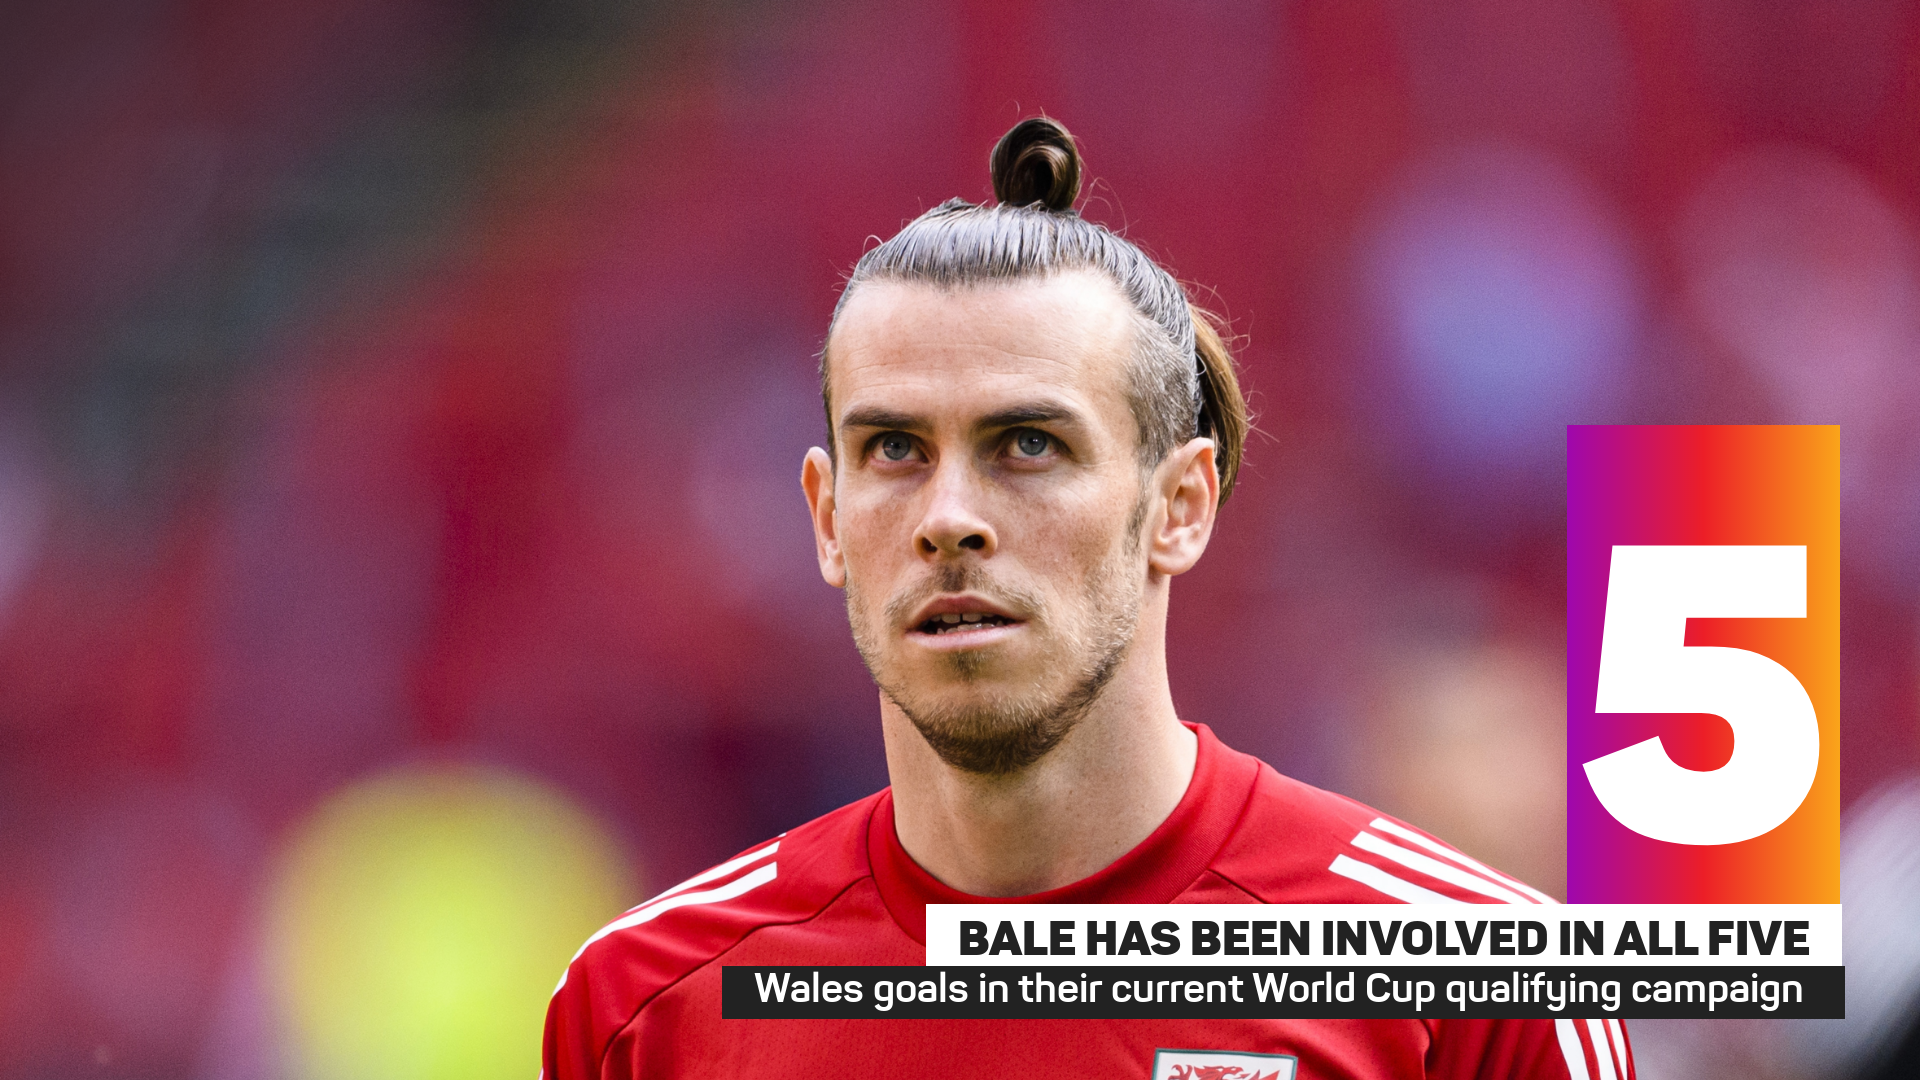 Gareth Bale has been involved in all five Wales goals in their World Cup qualifying campaign